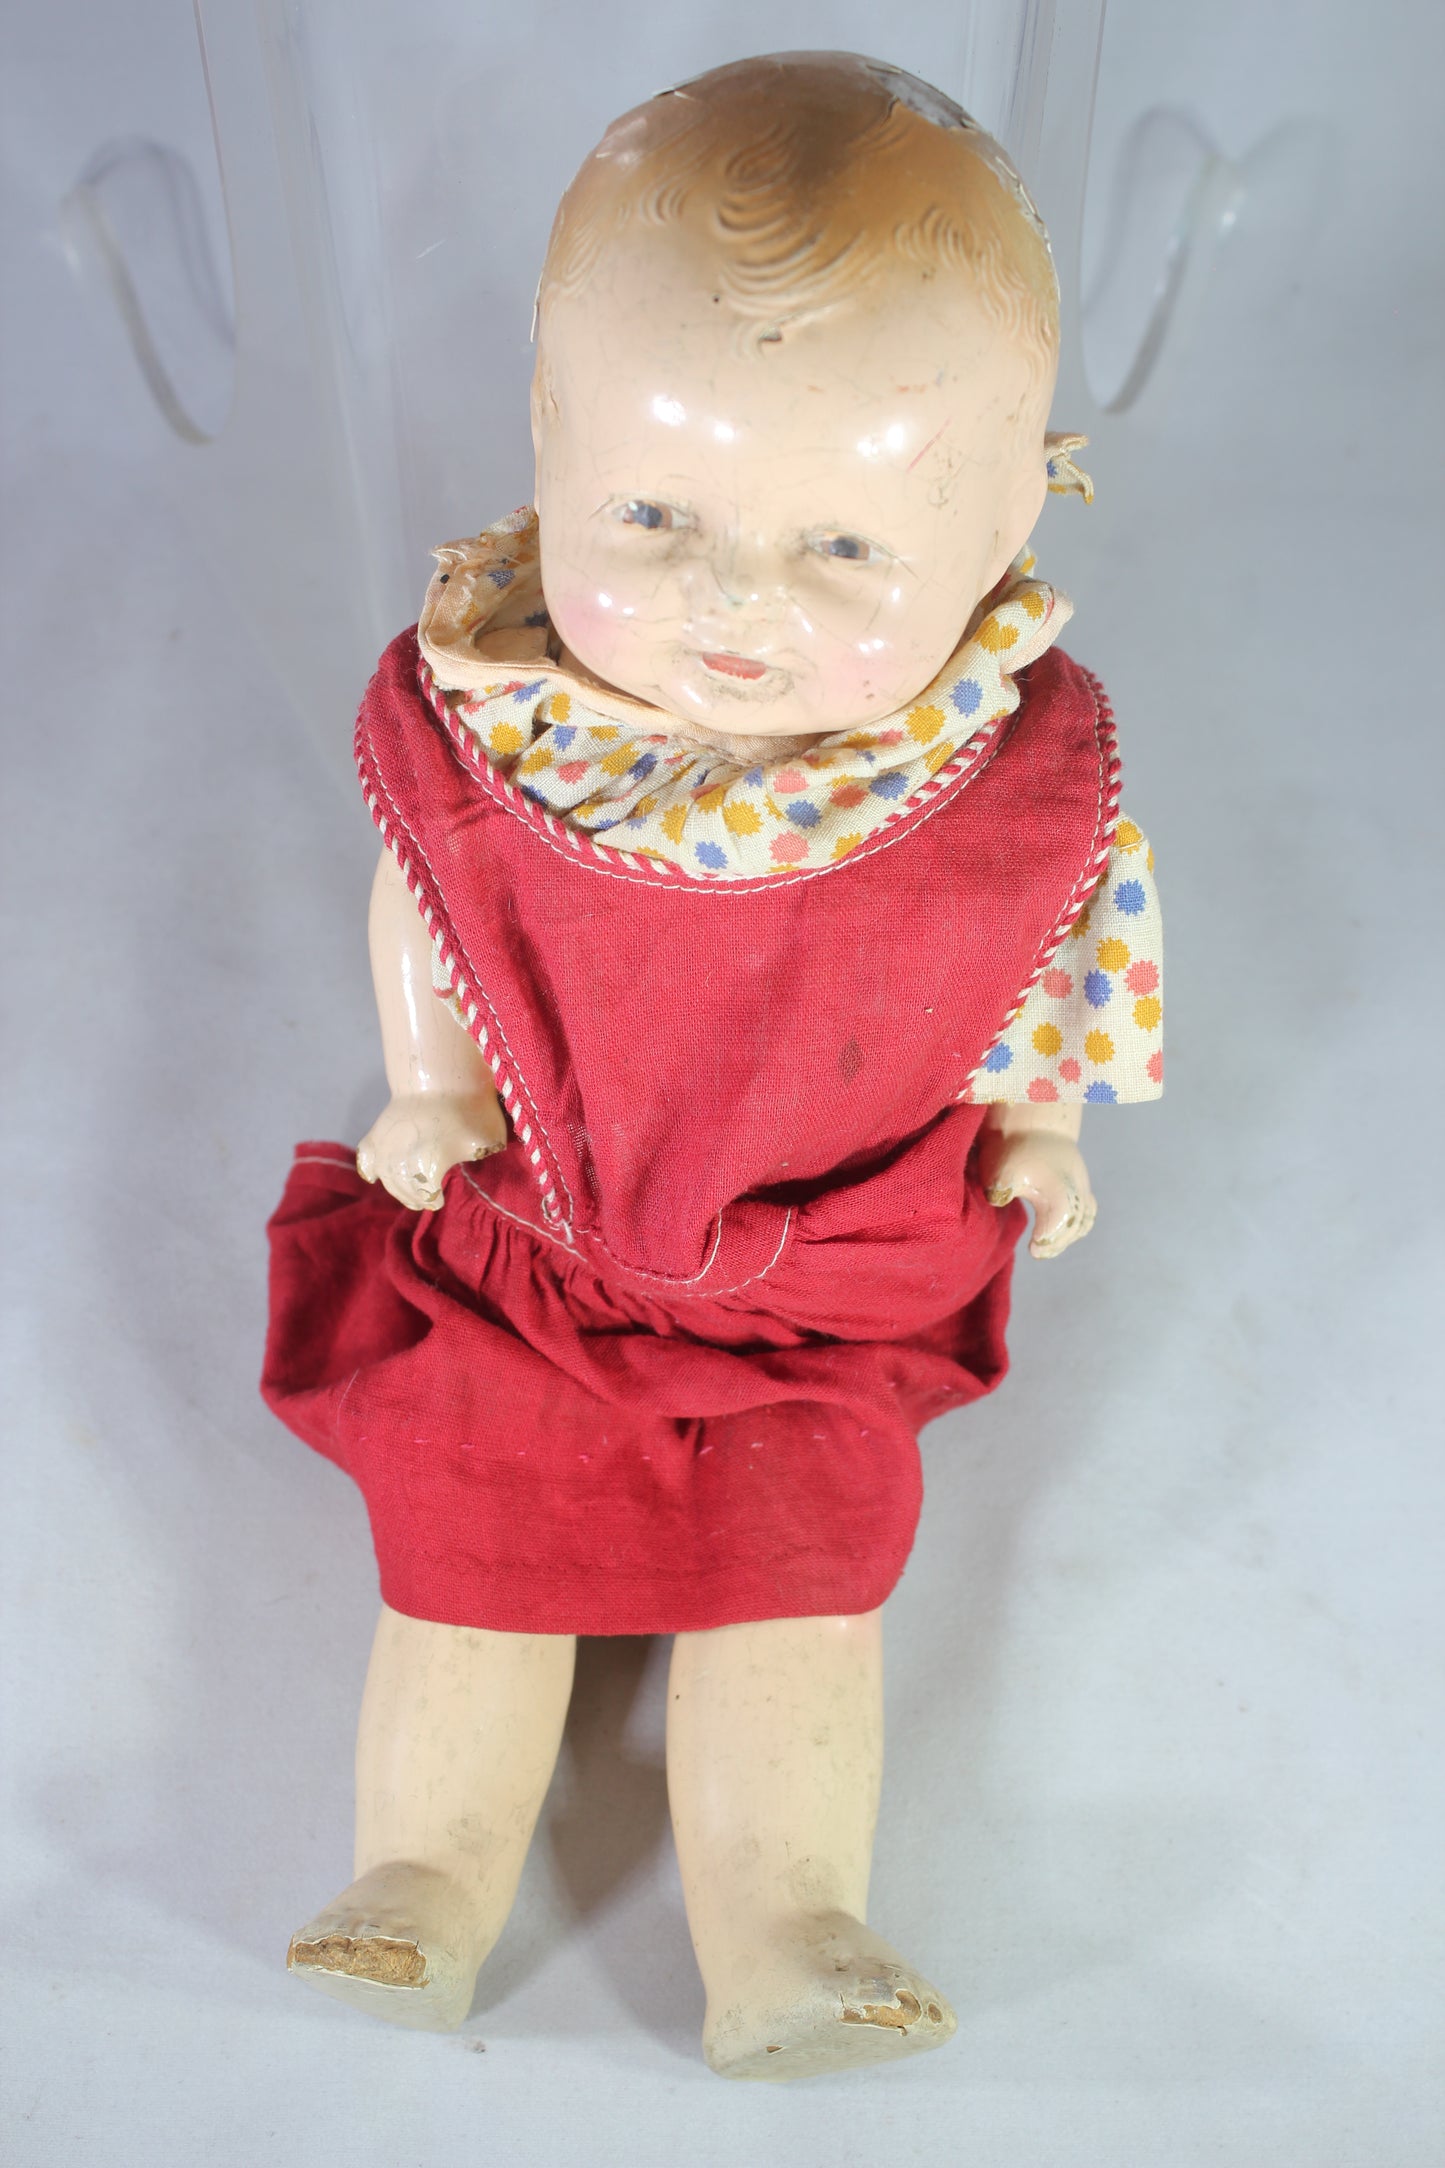 Antique American Character Doll Co. "Petite" 13 Inch Composition Doll, 1920s